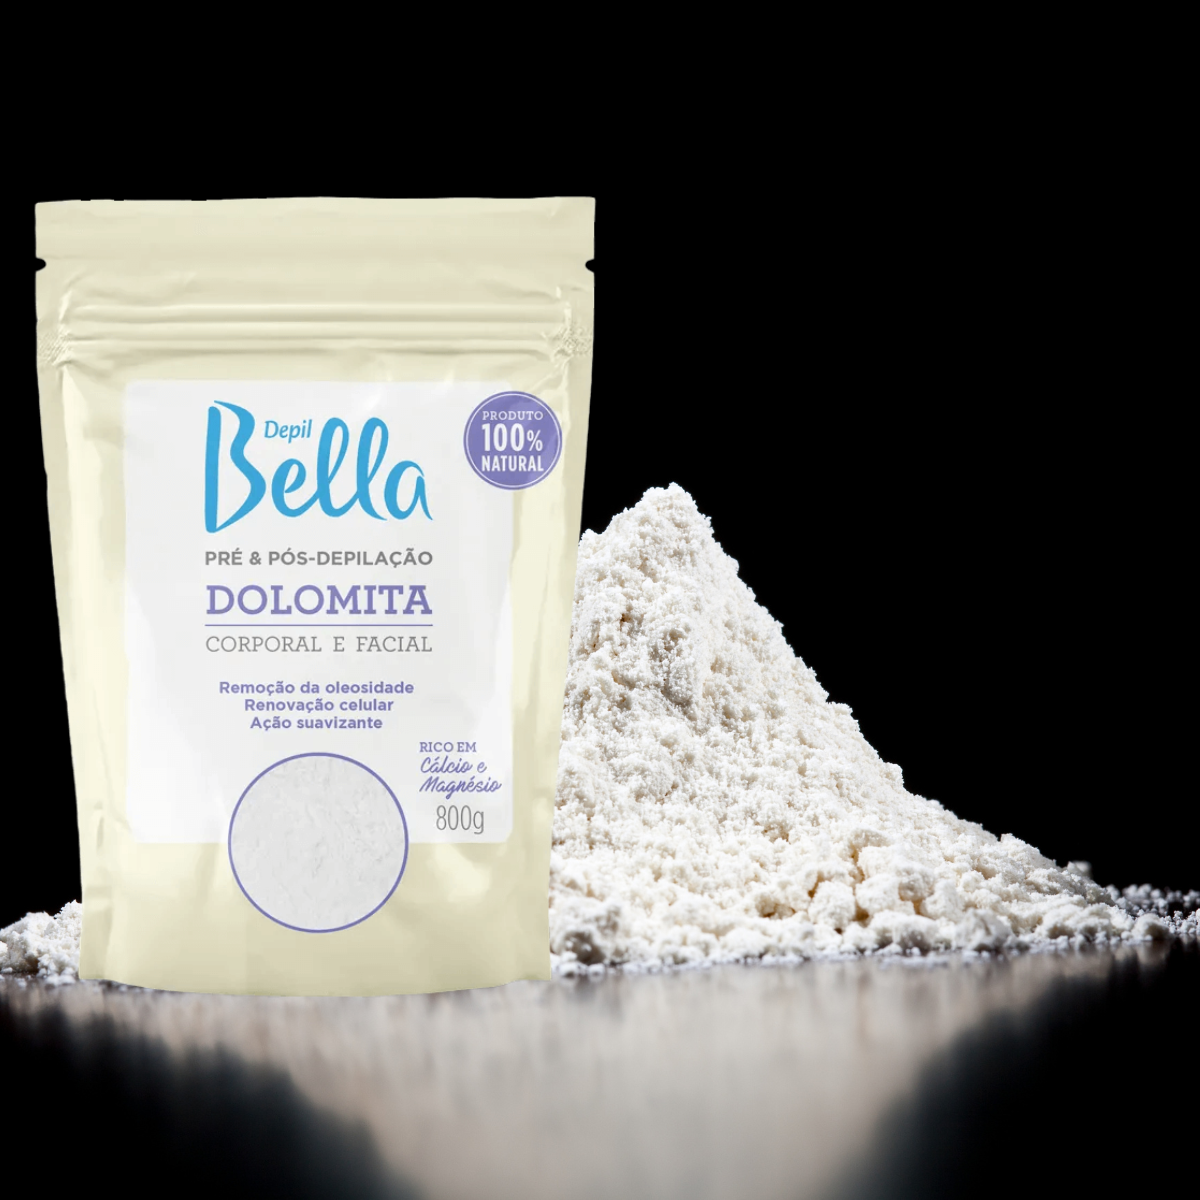 Depil Bella dolomite powder product for waxing